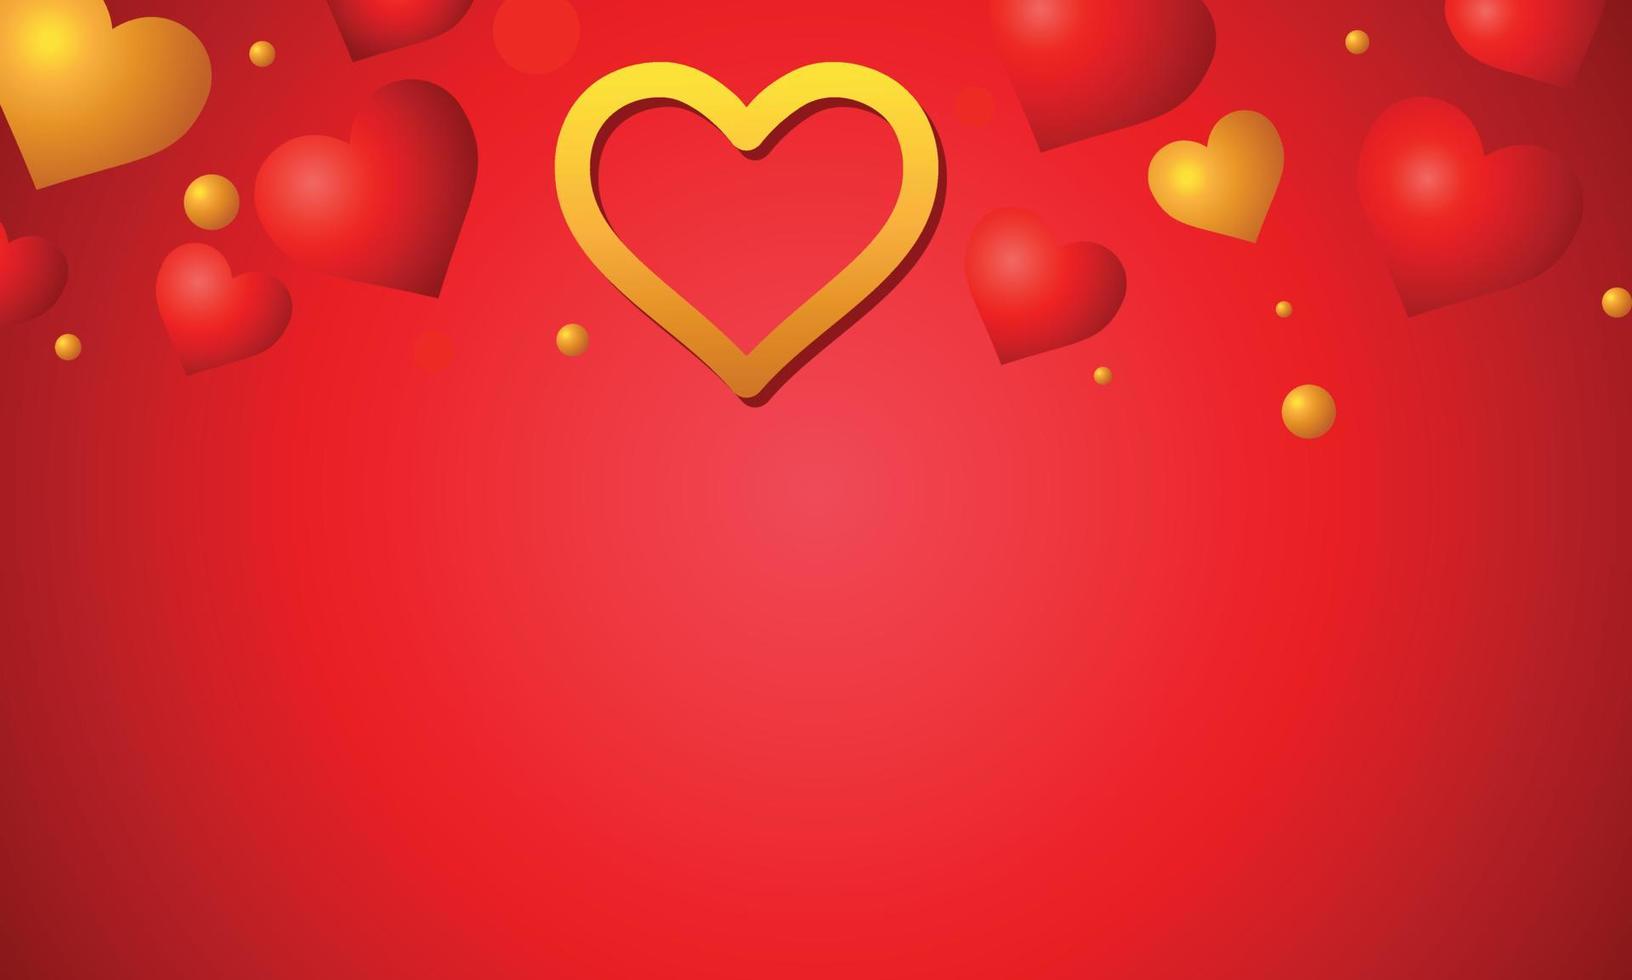 Romantic background with hearts, valentines day vector